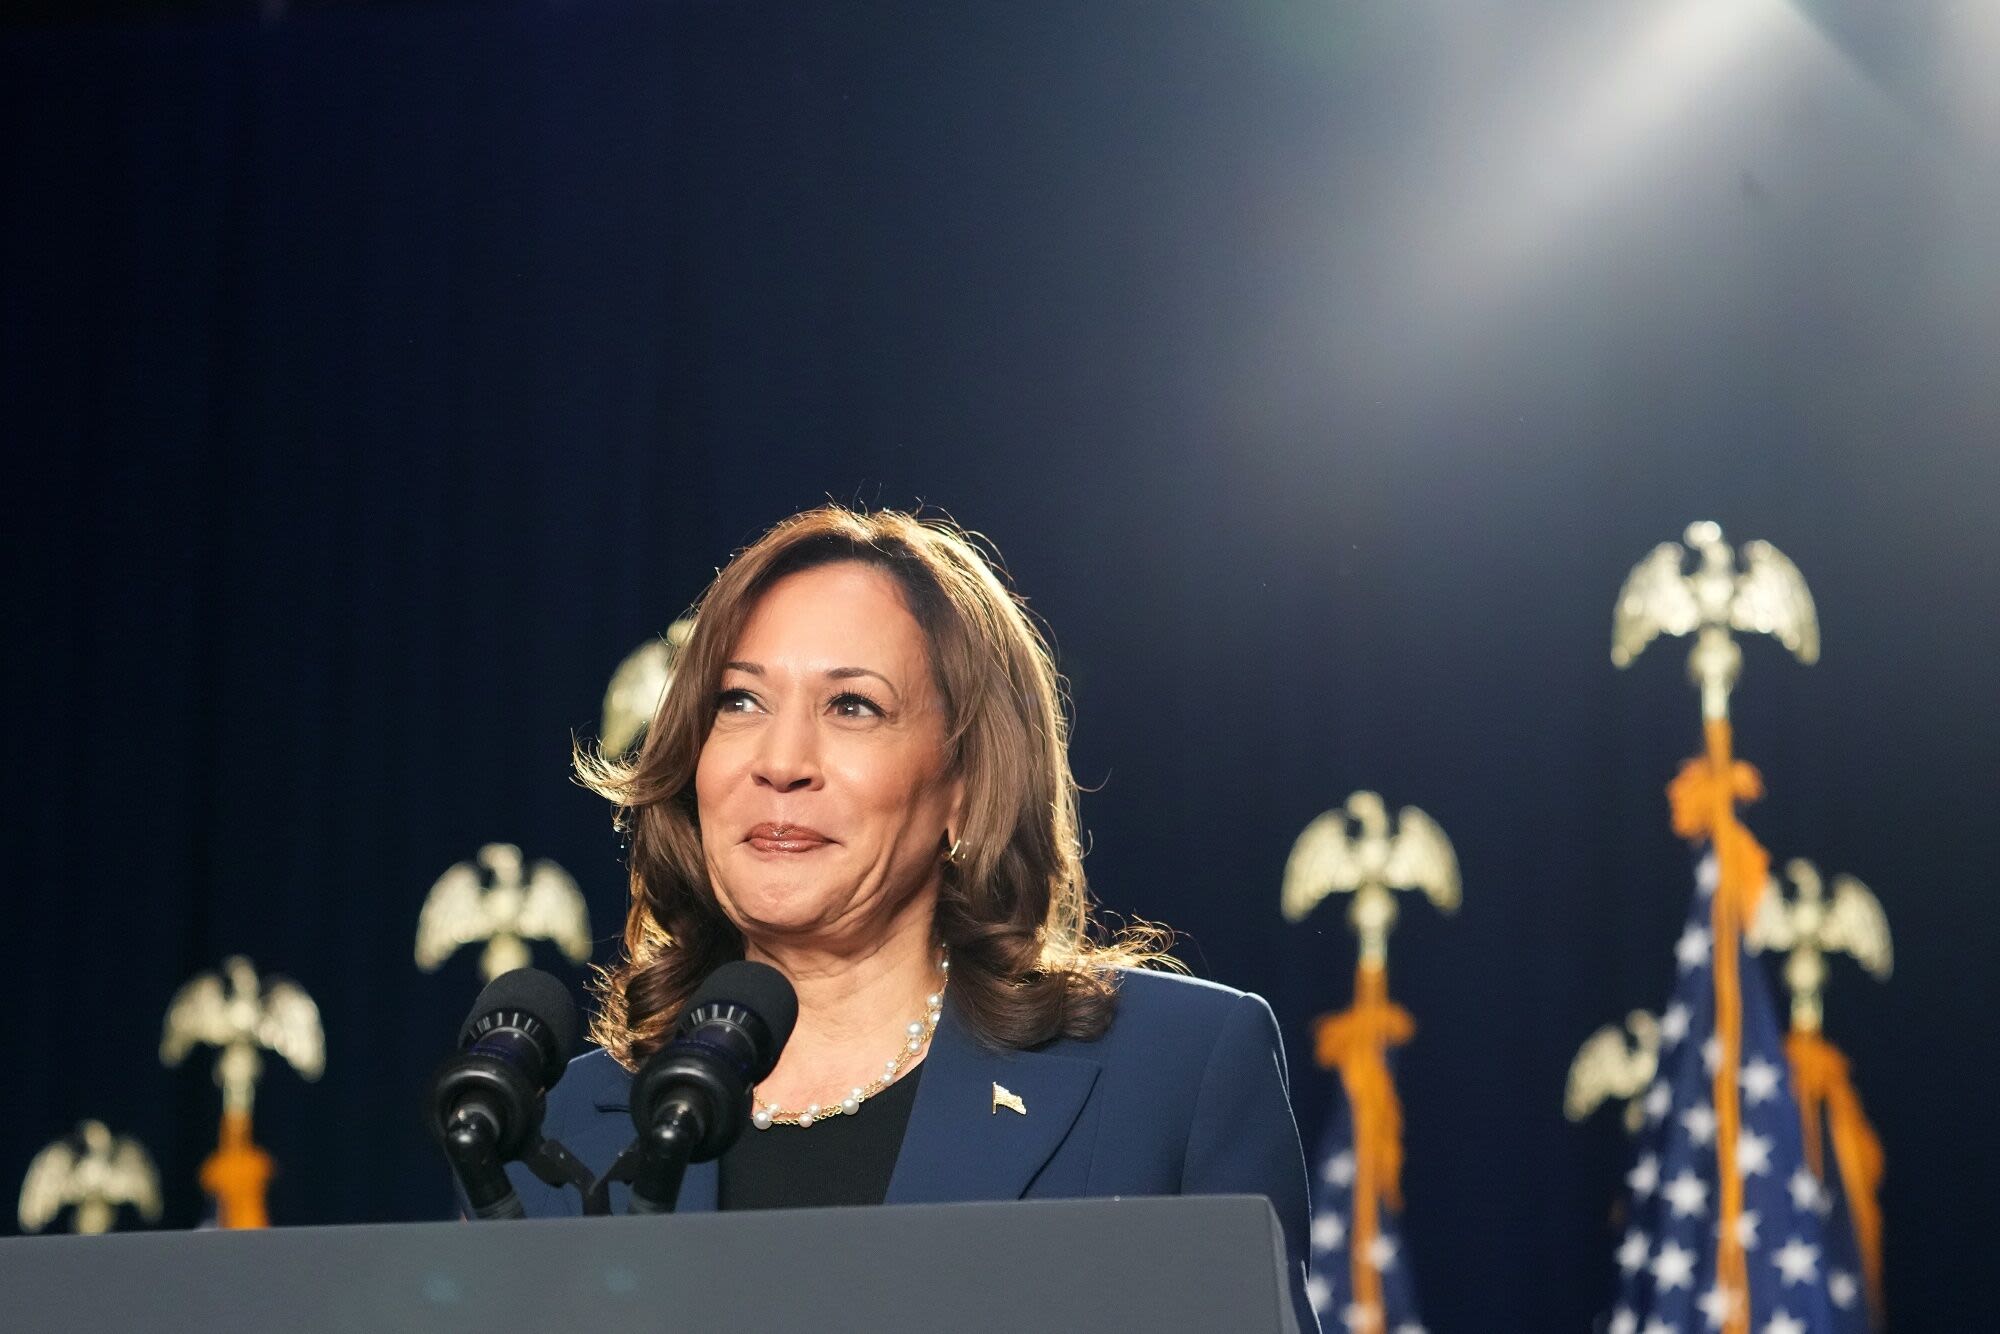 Women’s Groups Rush to Support Harris: Will That Help Her Win?